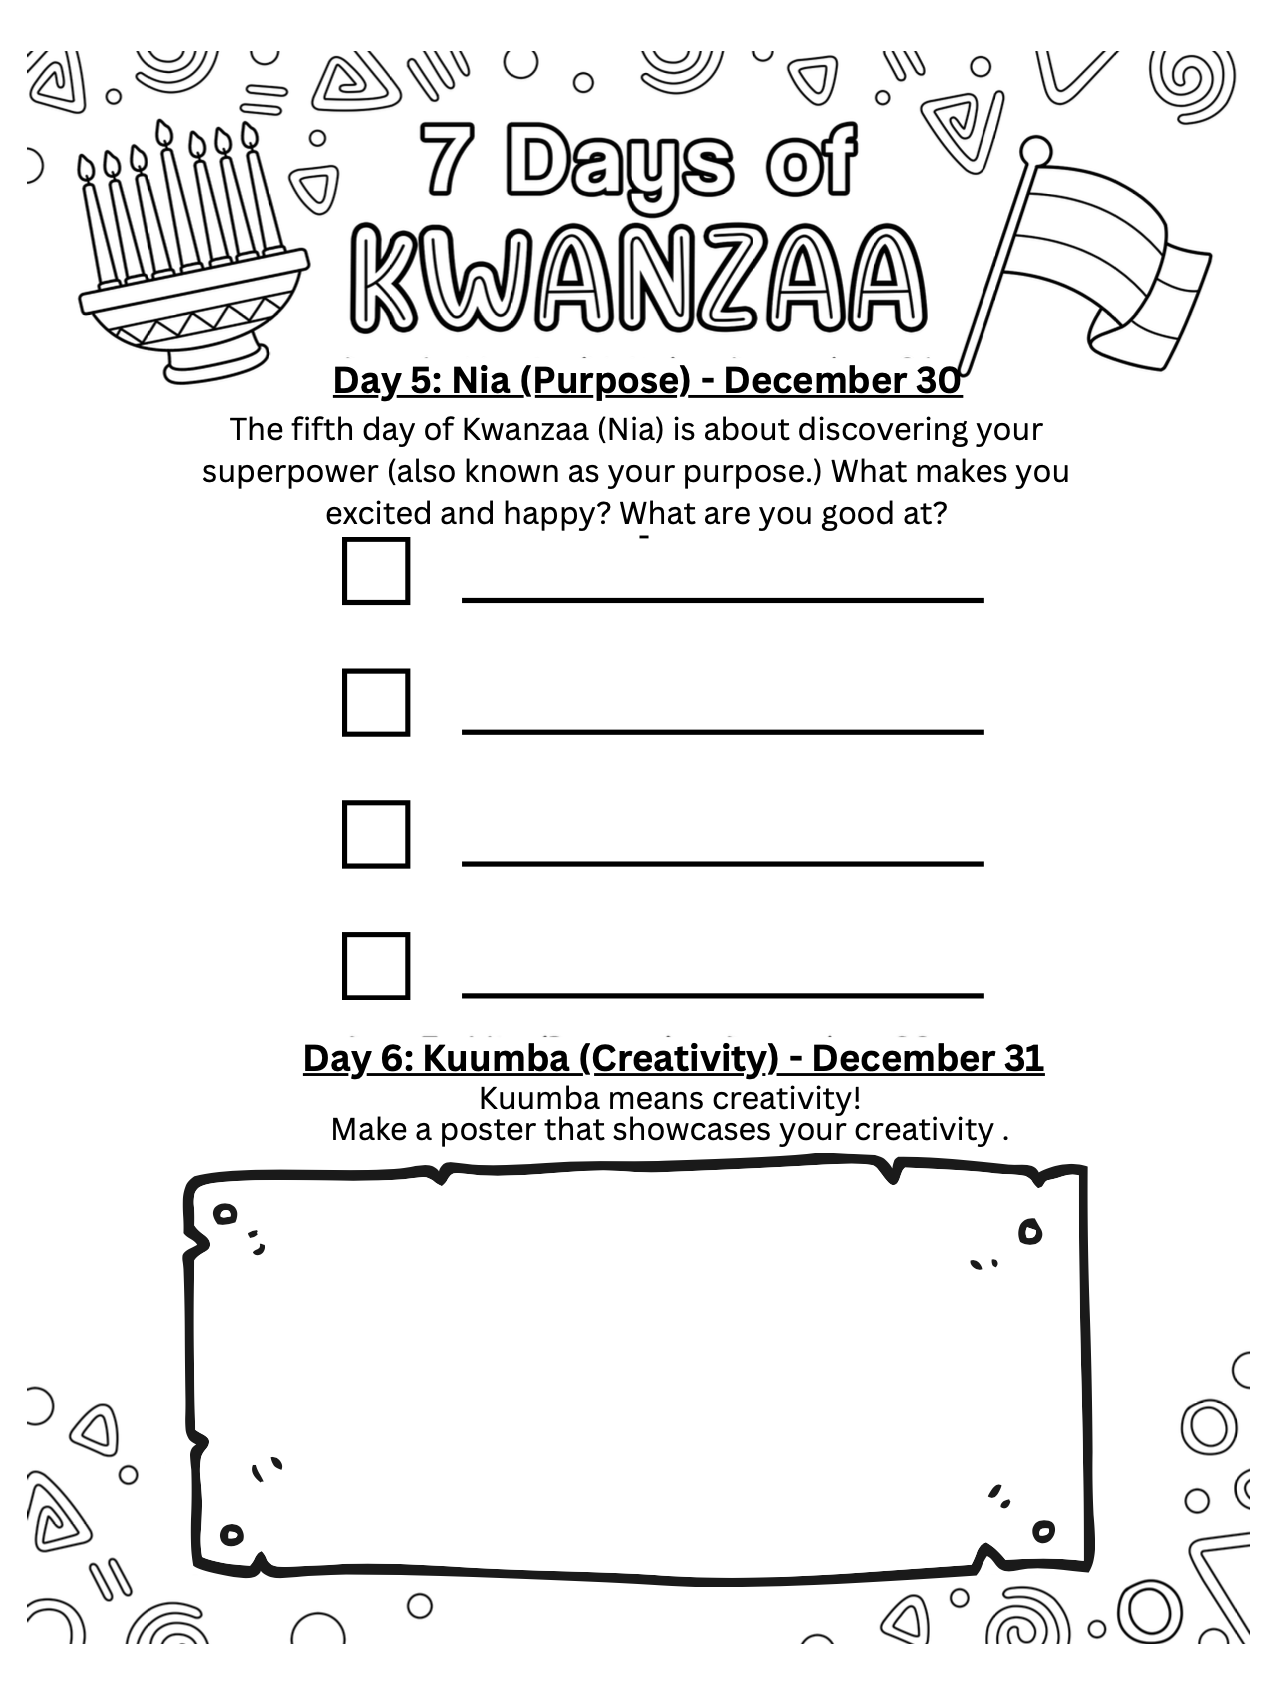 Let It Snow: A Christmas Kwanzaa Coloring Book